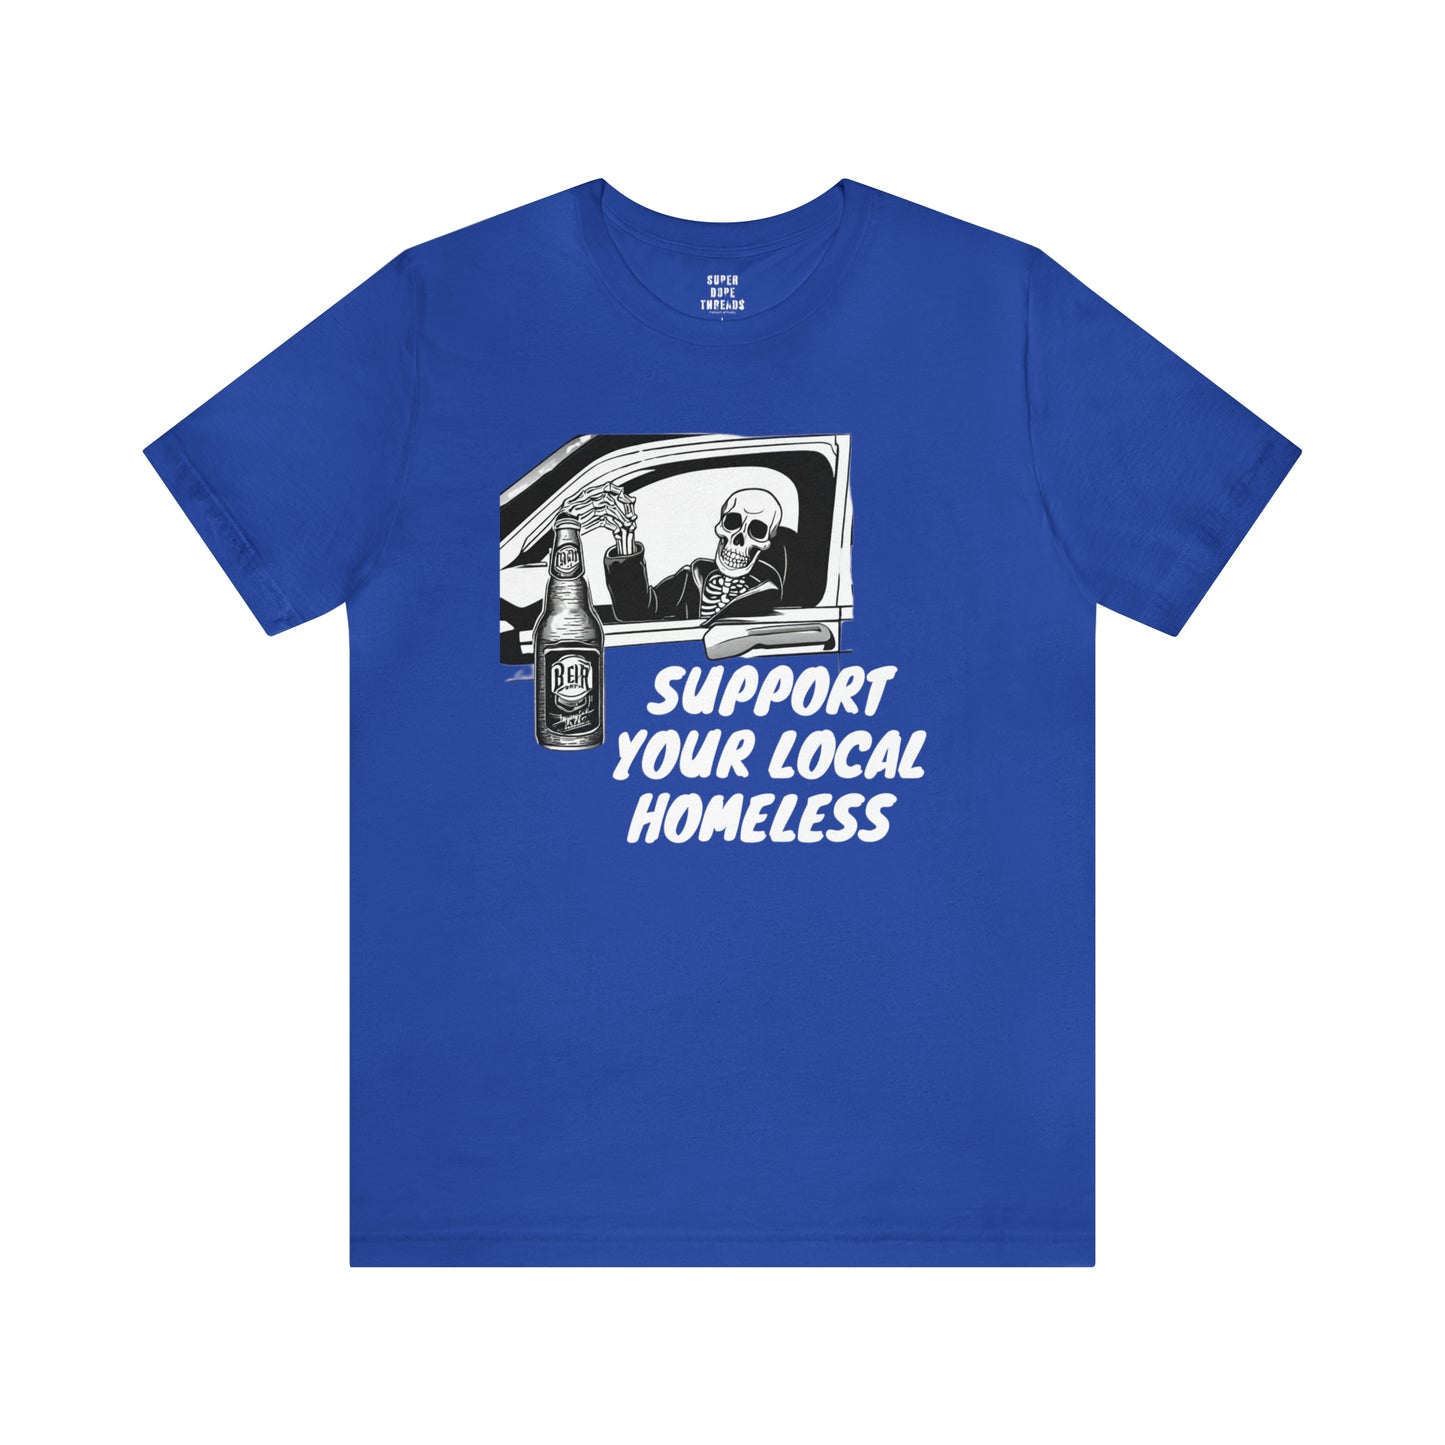 Super Dope Threads - Support Your Local Homeless